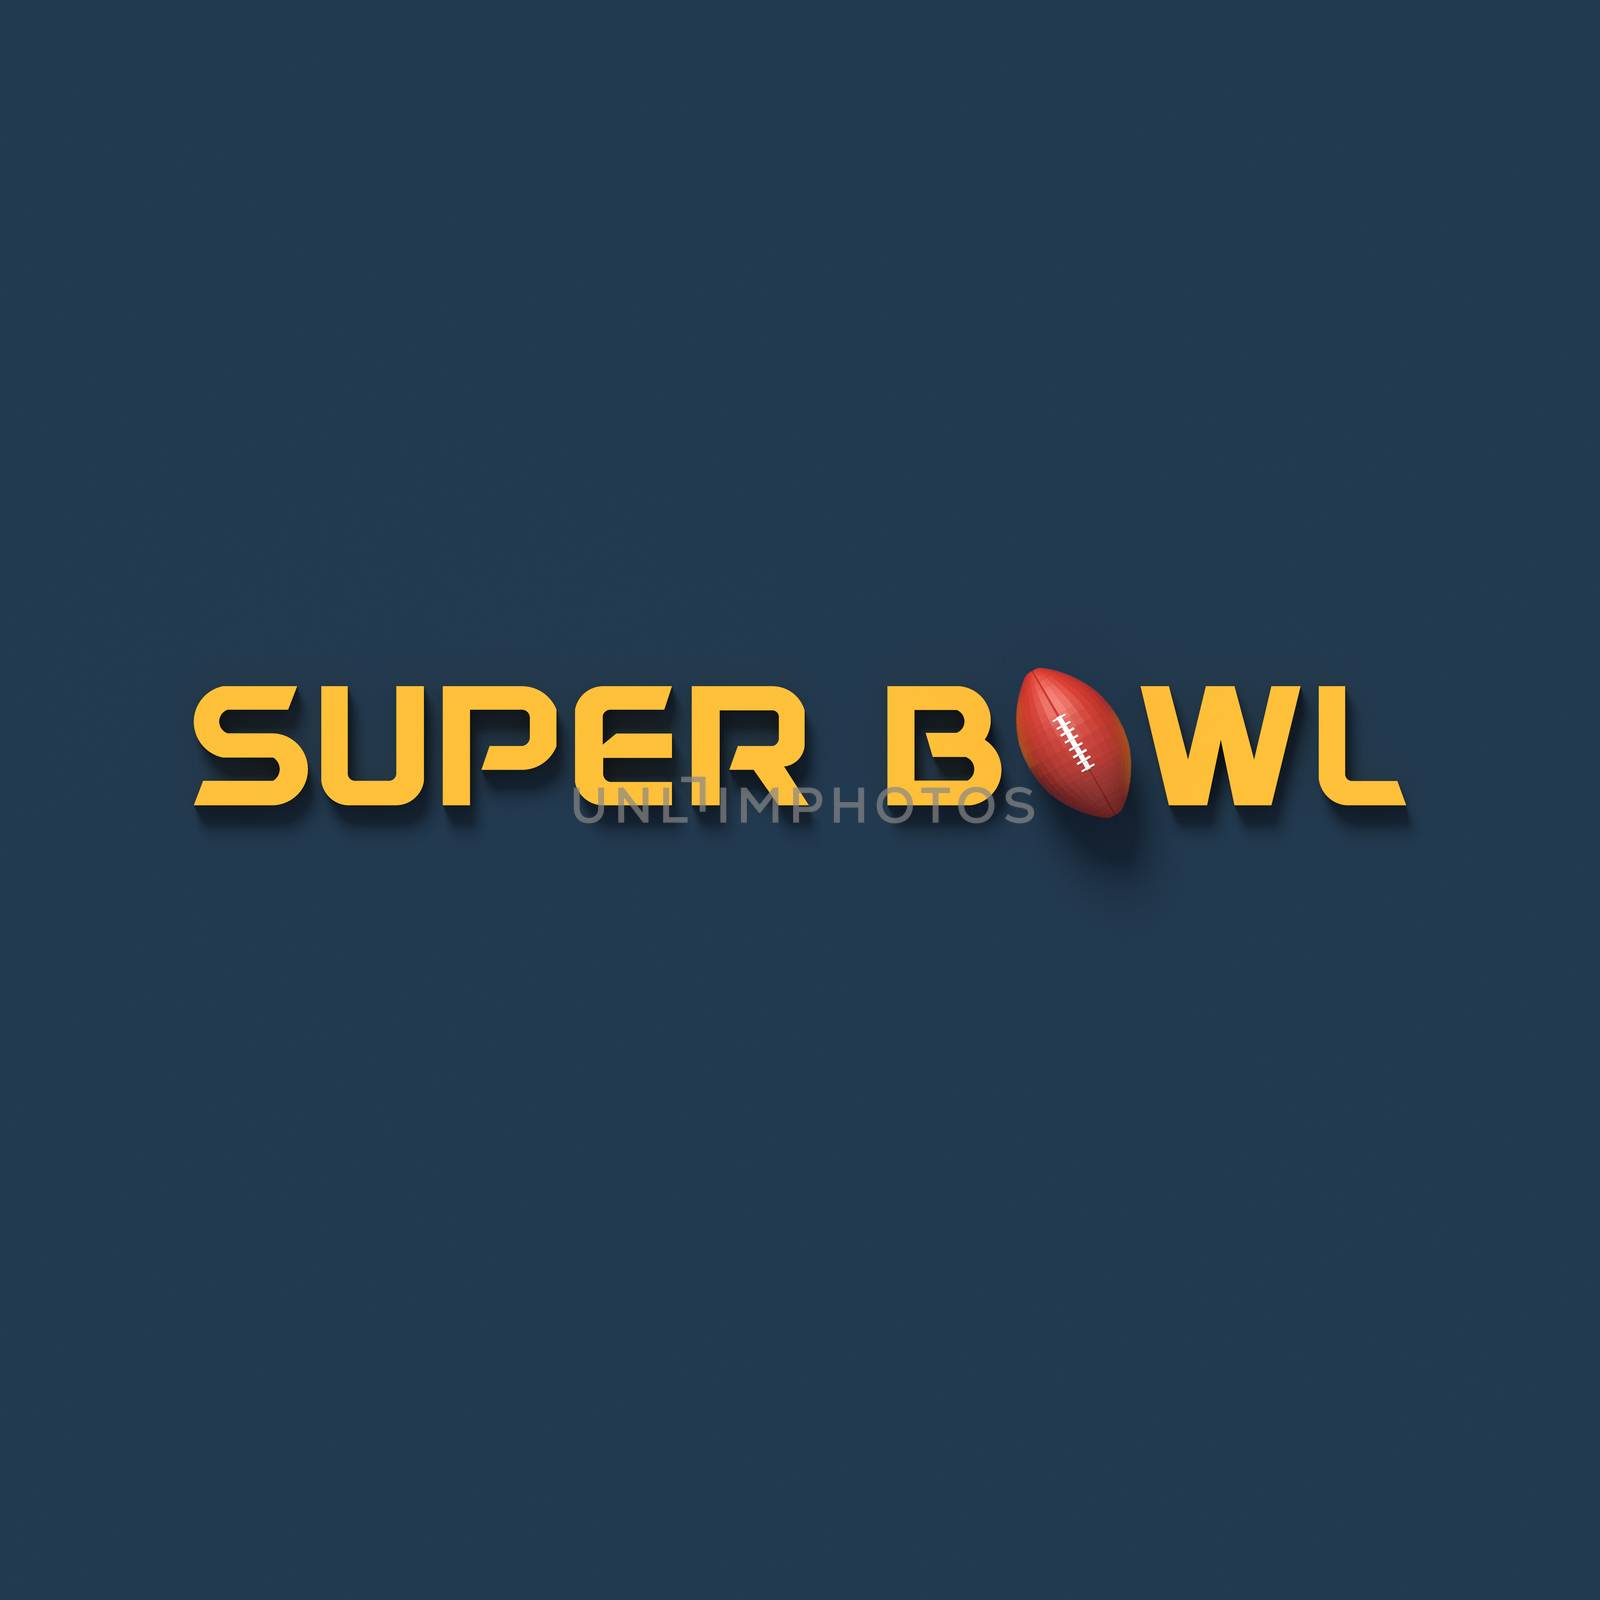 3D RENDERING WORDS 'SUPER BOWL' AND RUGBY BALL ON PLAIN BACKGROUND by PrettyTG